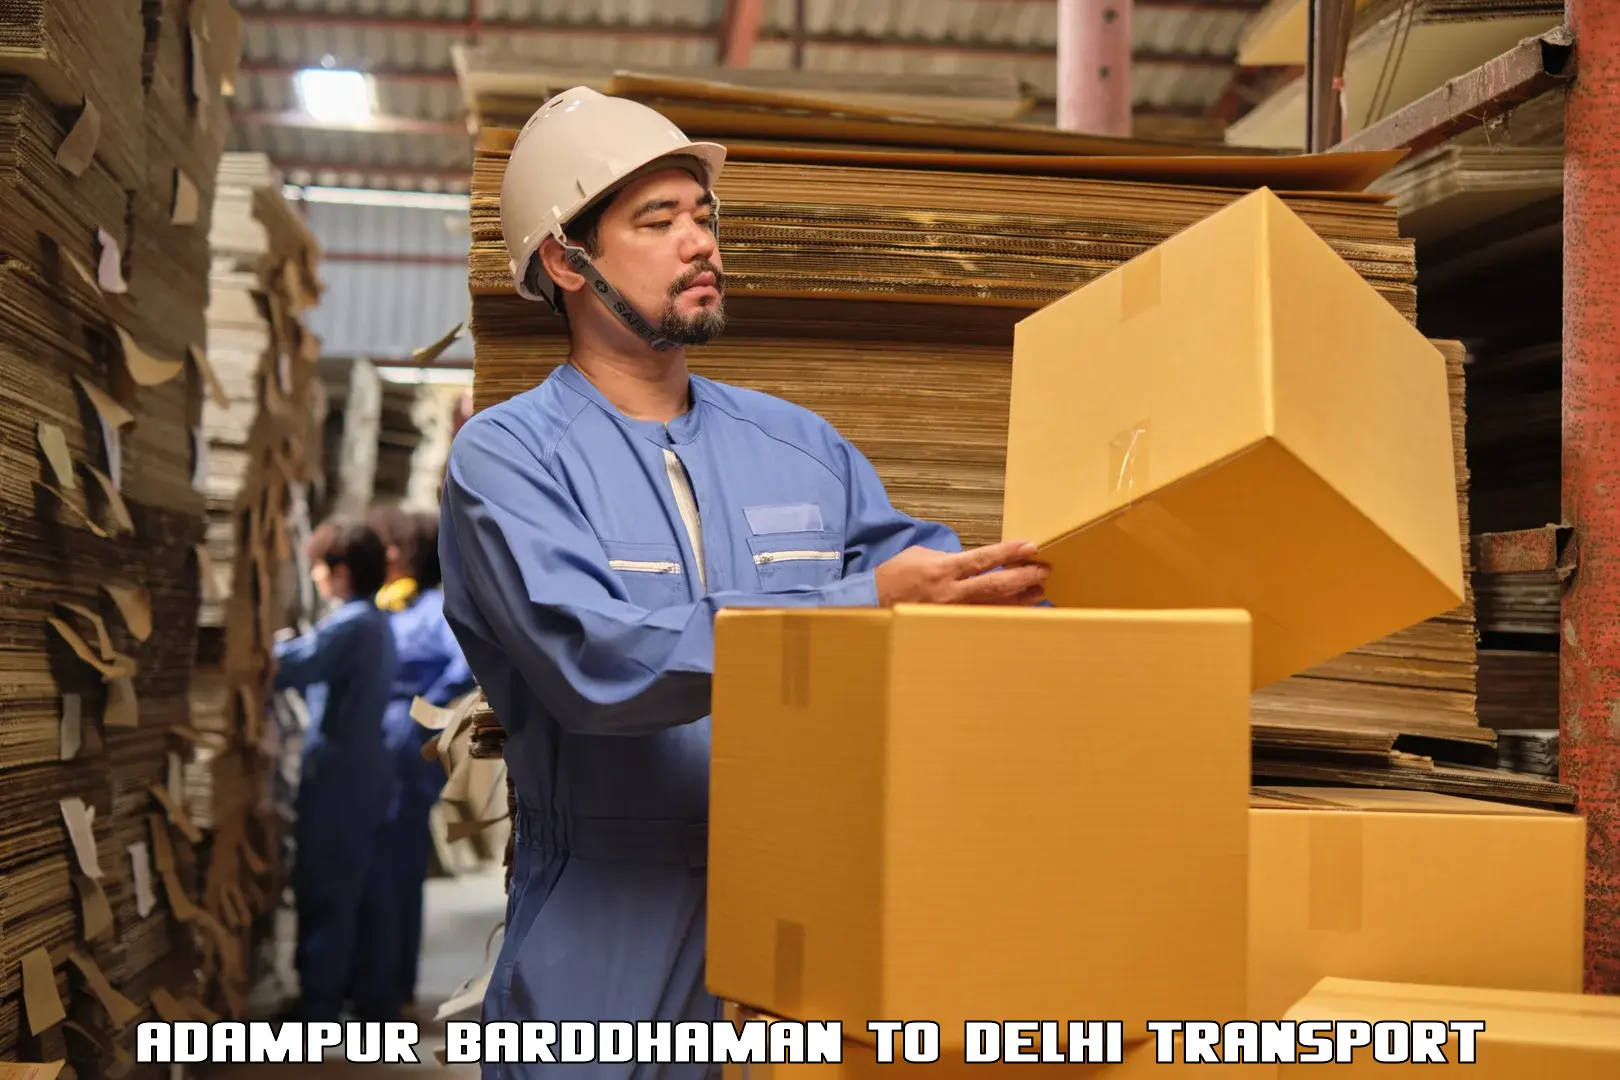 Lorry transport service Adampur Barddhaman to NCR